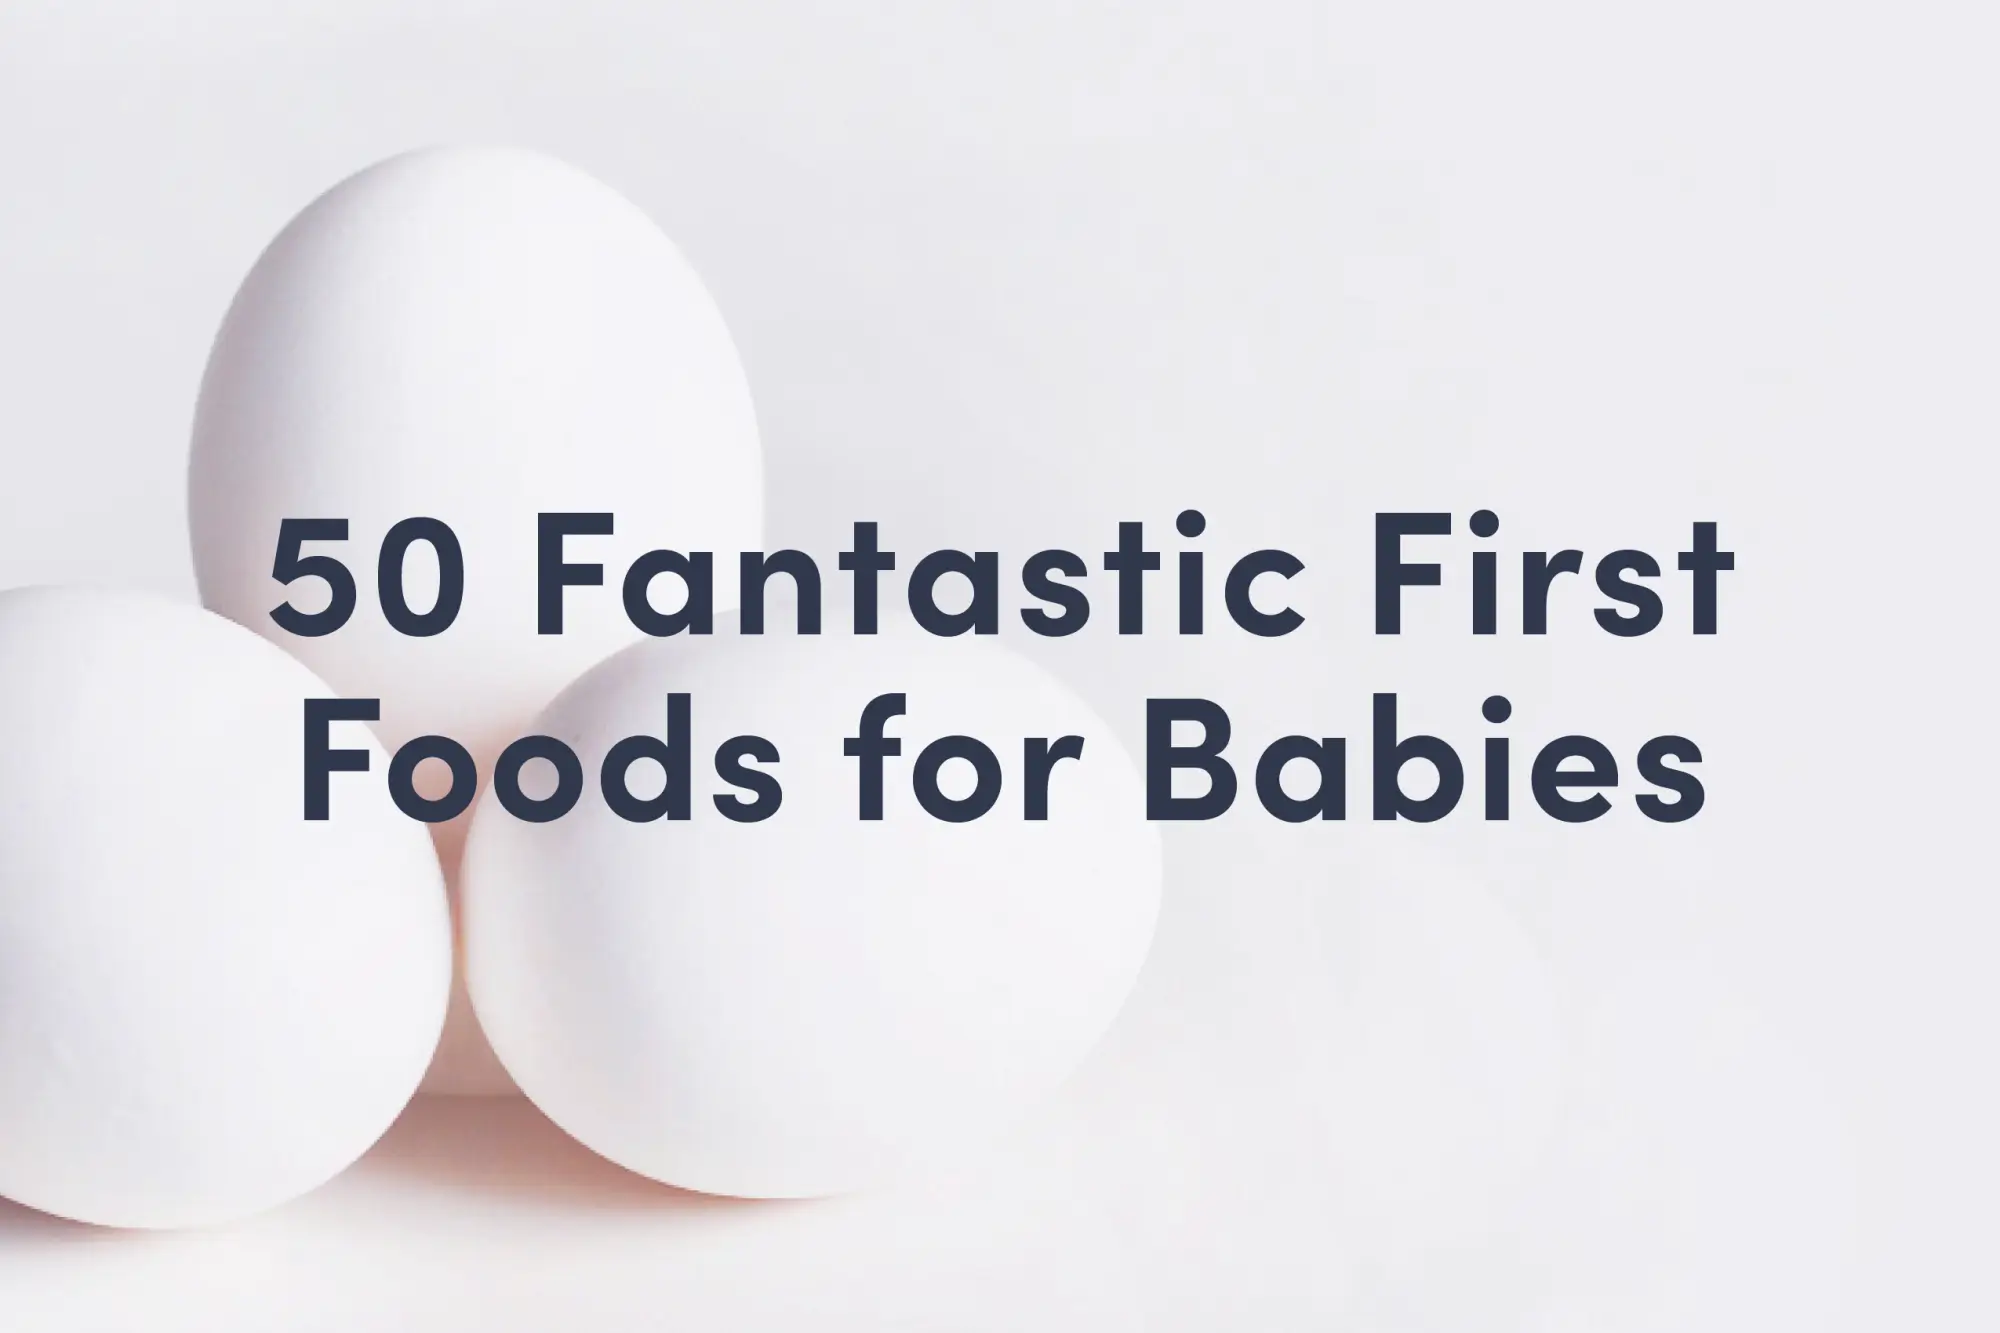 a cover image with 3 white eggs on it that reads 50 Fantastic First Foods for Babies